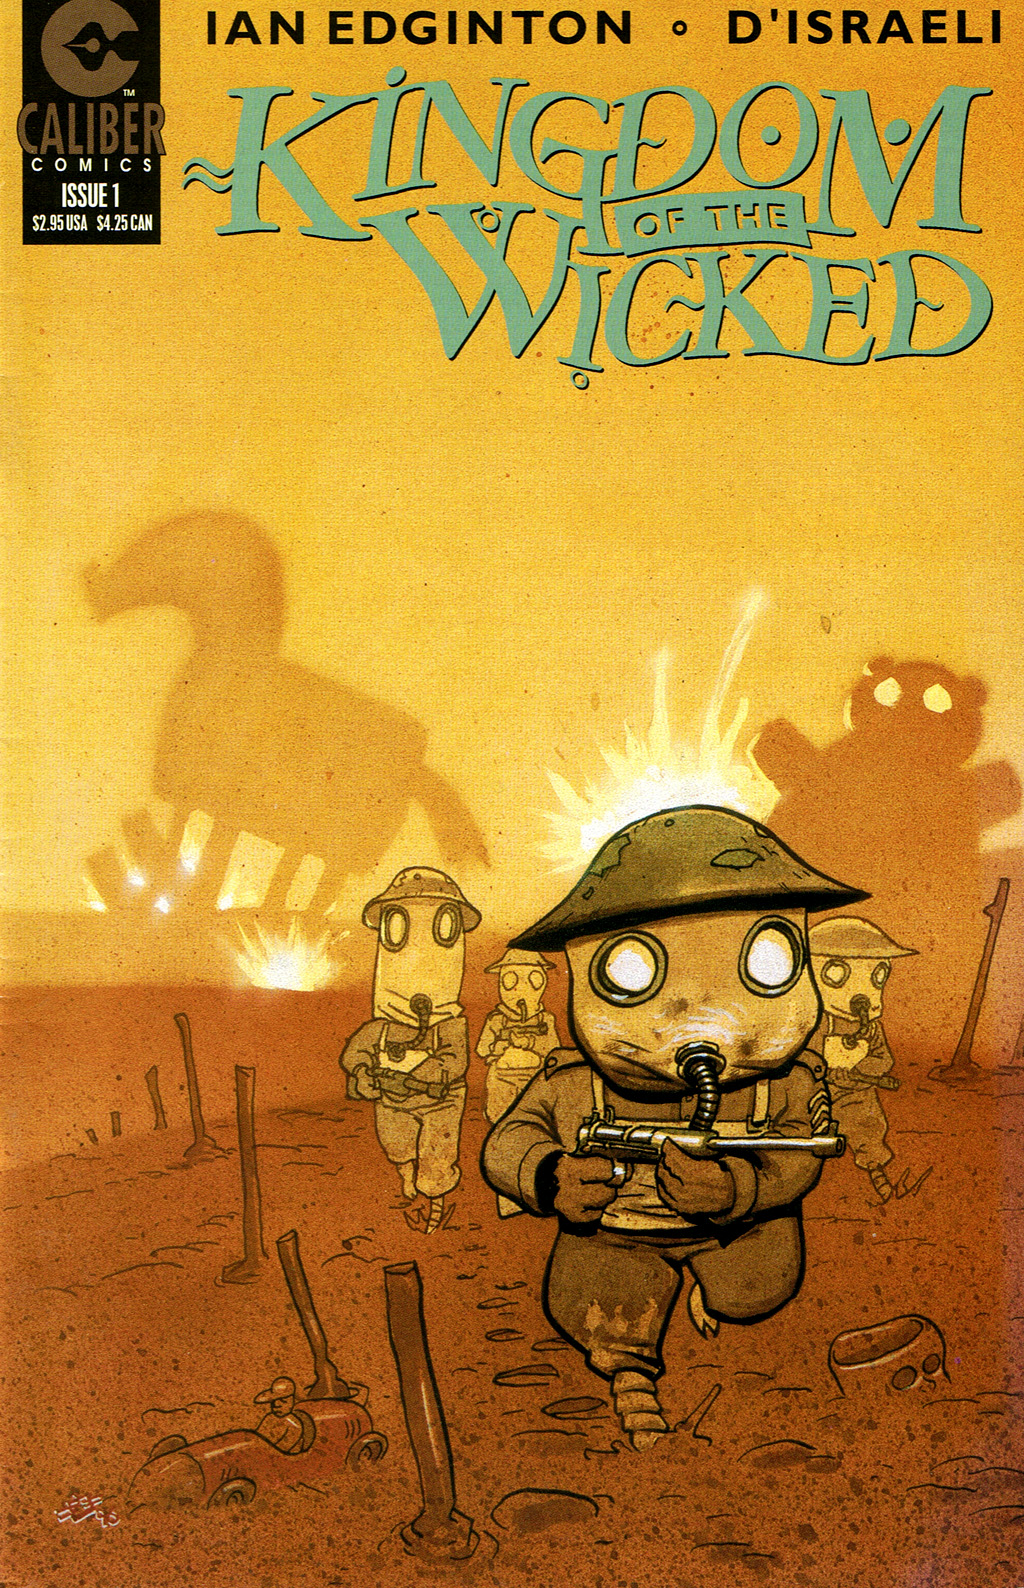 Read online Kingdom of the Wicked comic -  Issue #1 - 1